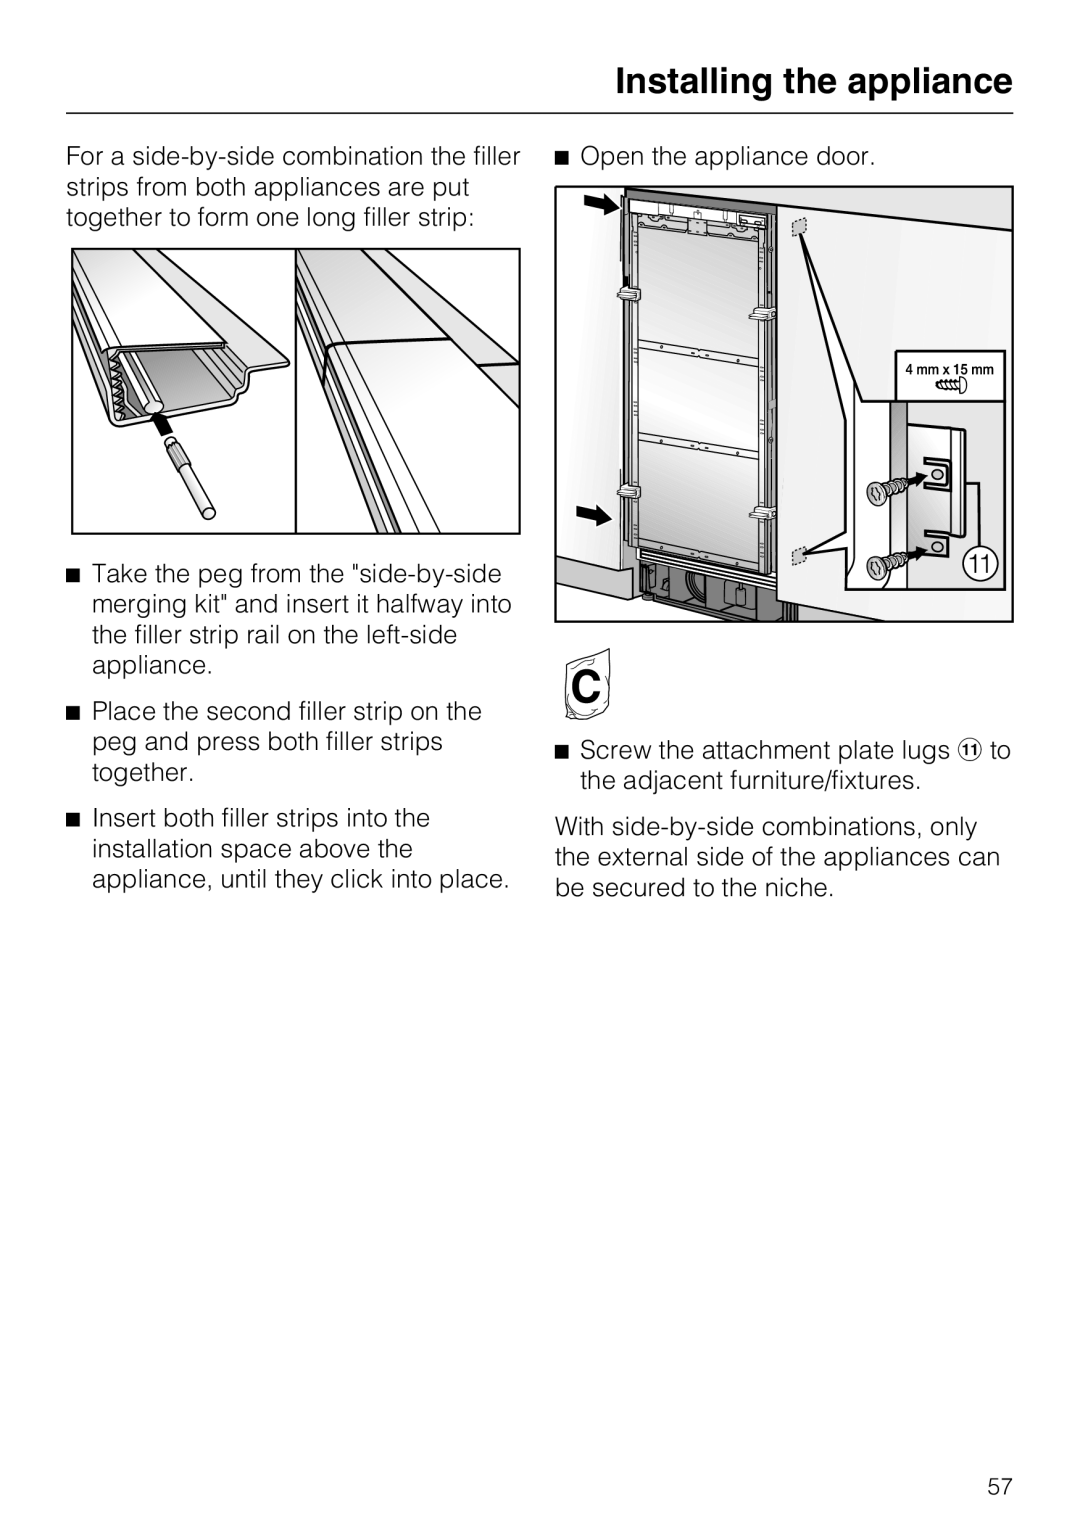 Miele 09 920 570 installation instructions Installing the appliance, Open the appliance door 